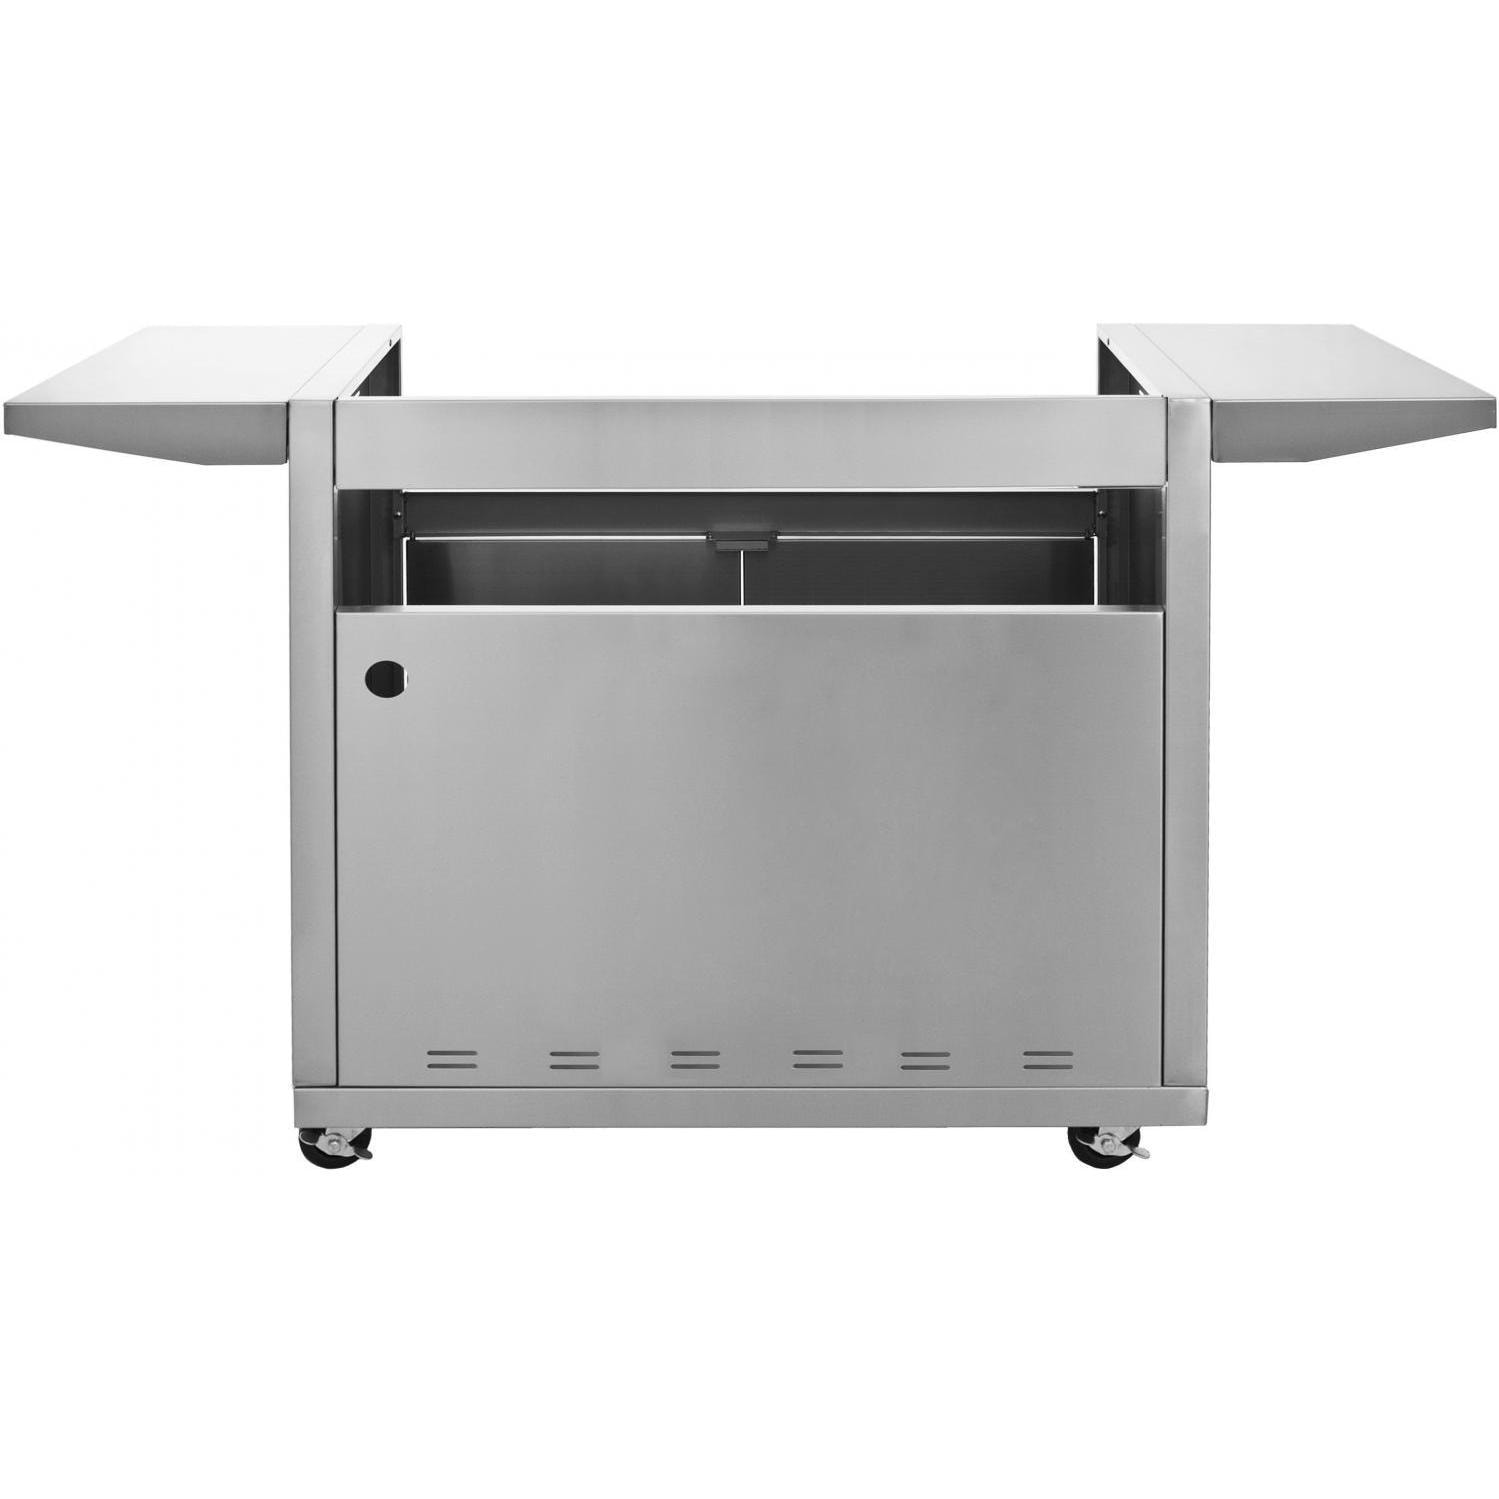 Blaze Grills Cart For 40-Inch Gas Grill - image 3 of 4